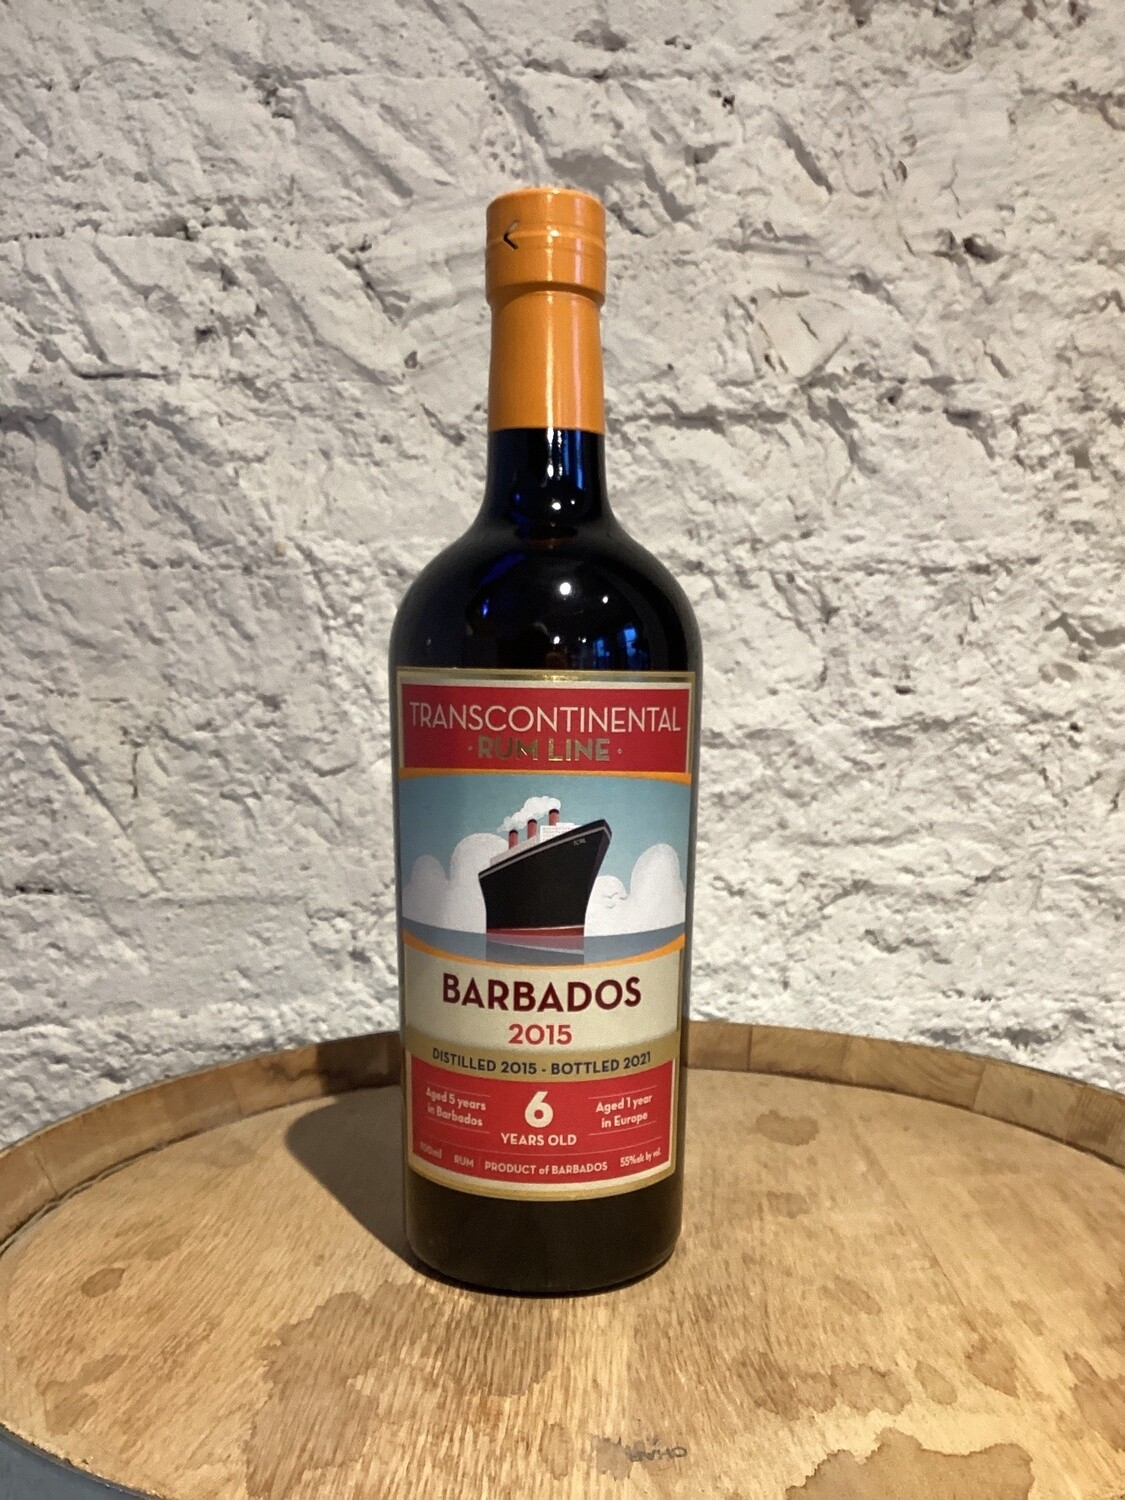 Transcontinentral Rum, Barbados 2015, 6 Years